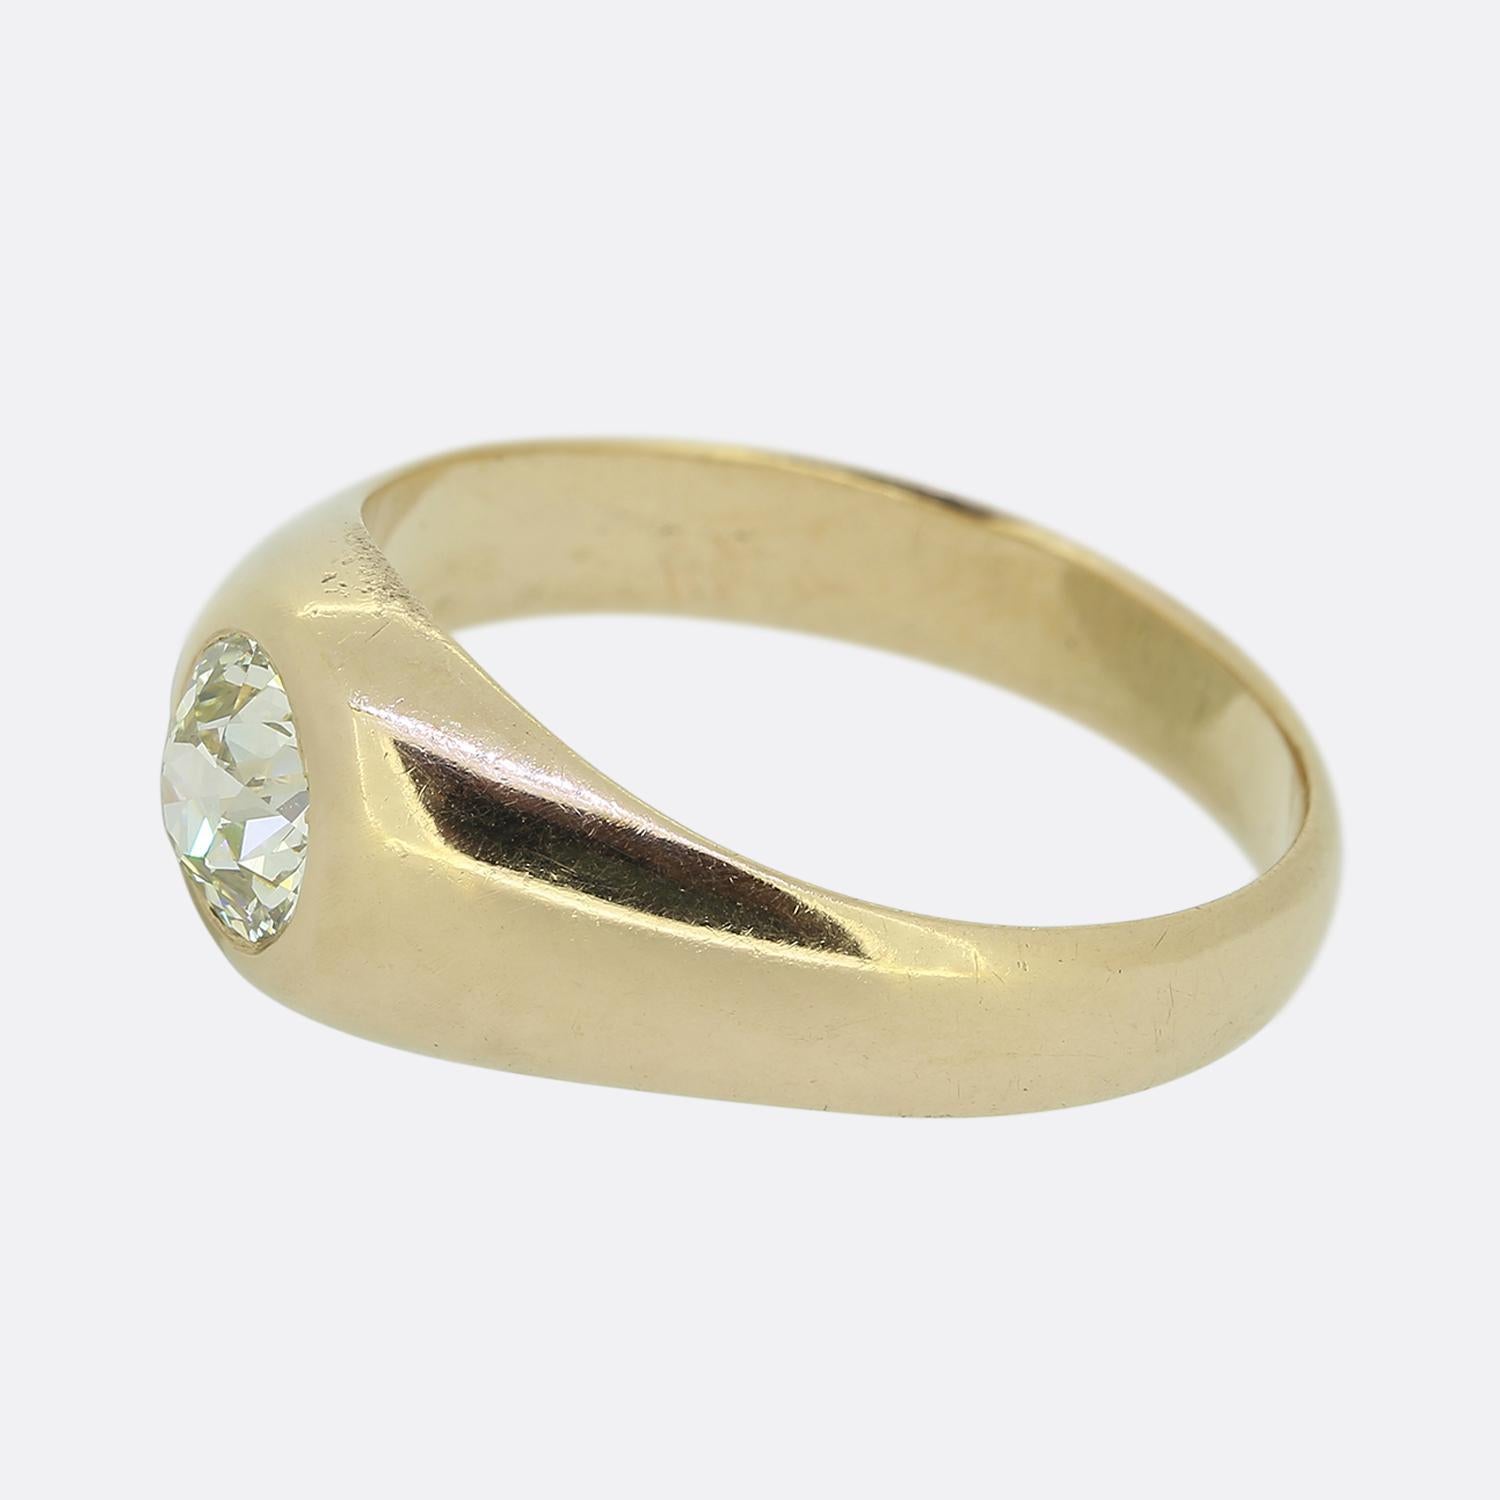 Here we have a classically styled diamond single stone ring. This antique piece has been crafted from 18ct yellow gold and plays host to a single bezel set old mine cut diamond amidst plain wide shoulders.

Condition: Used (Very Good)
Weight: 4.4